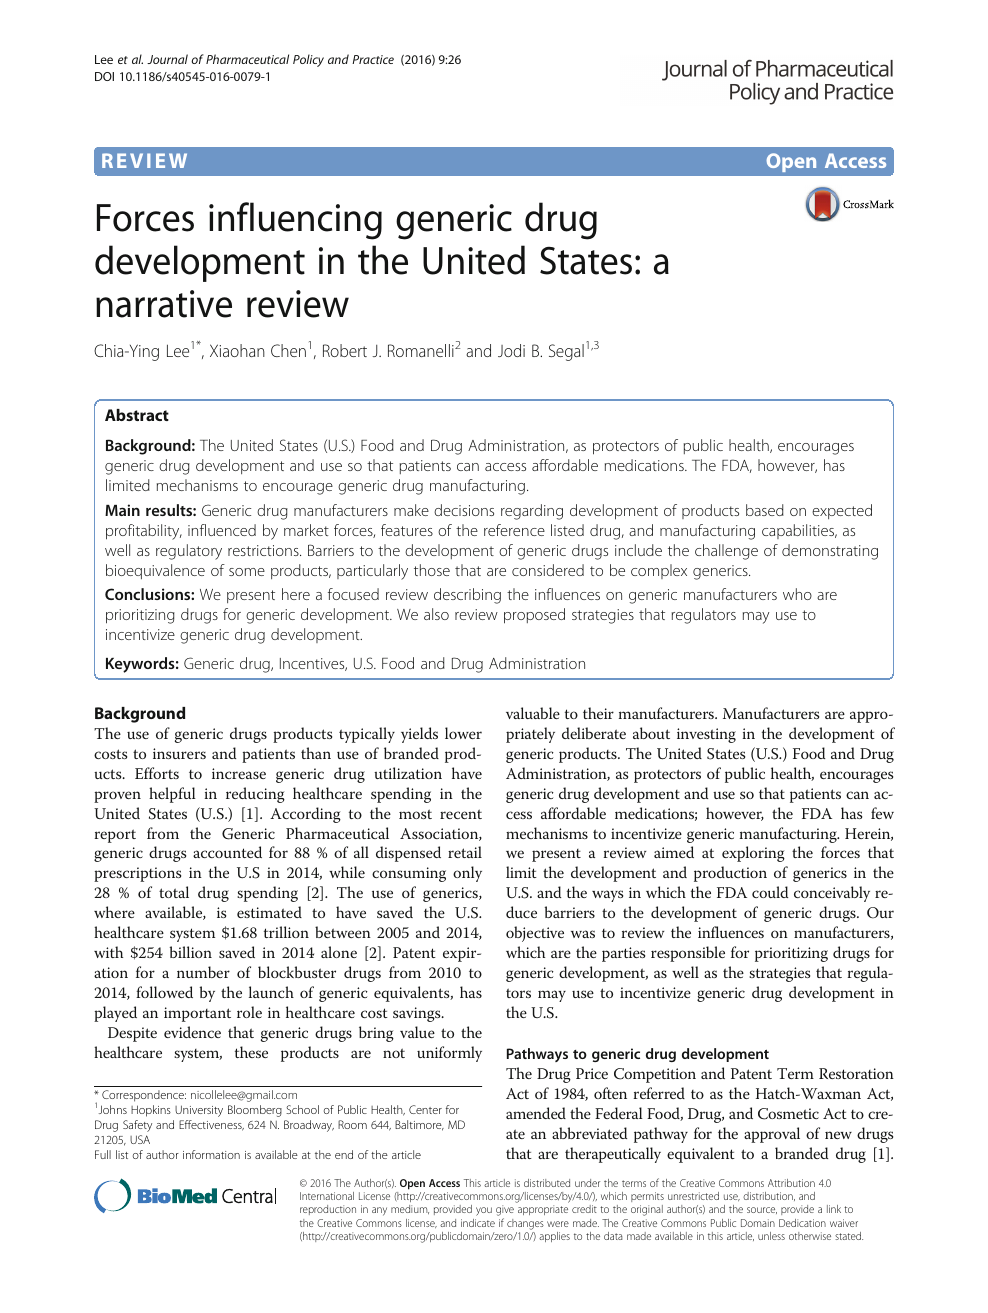 Forces influencing generic drug development in the United States